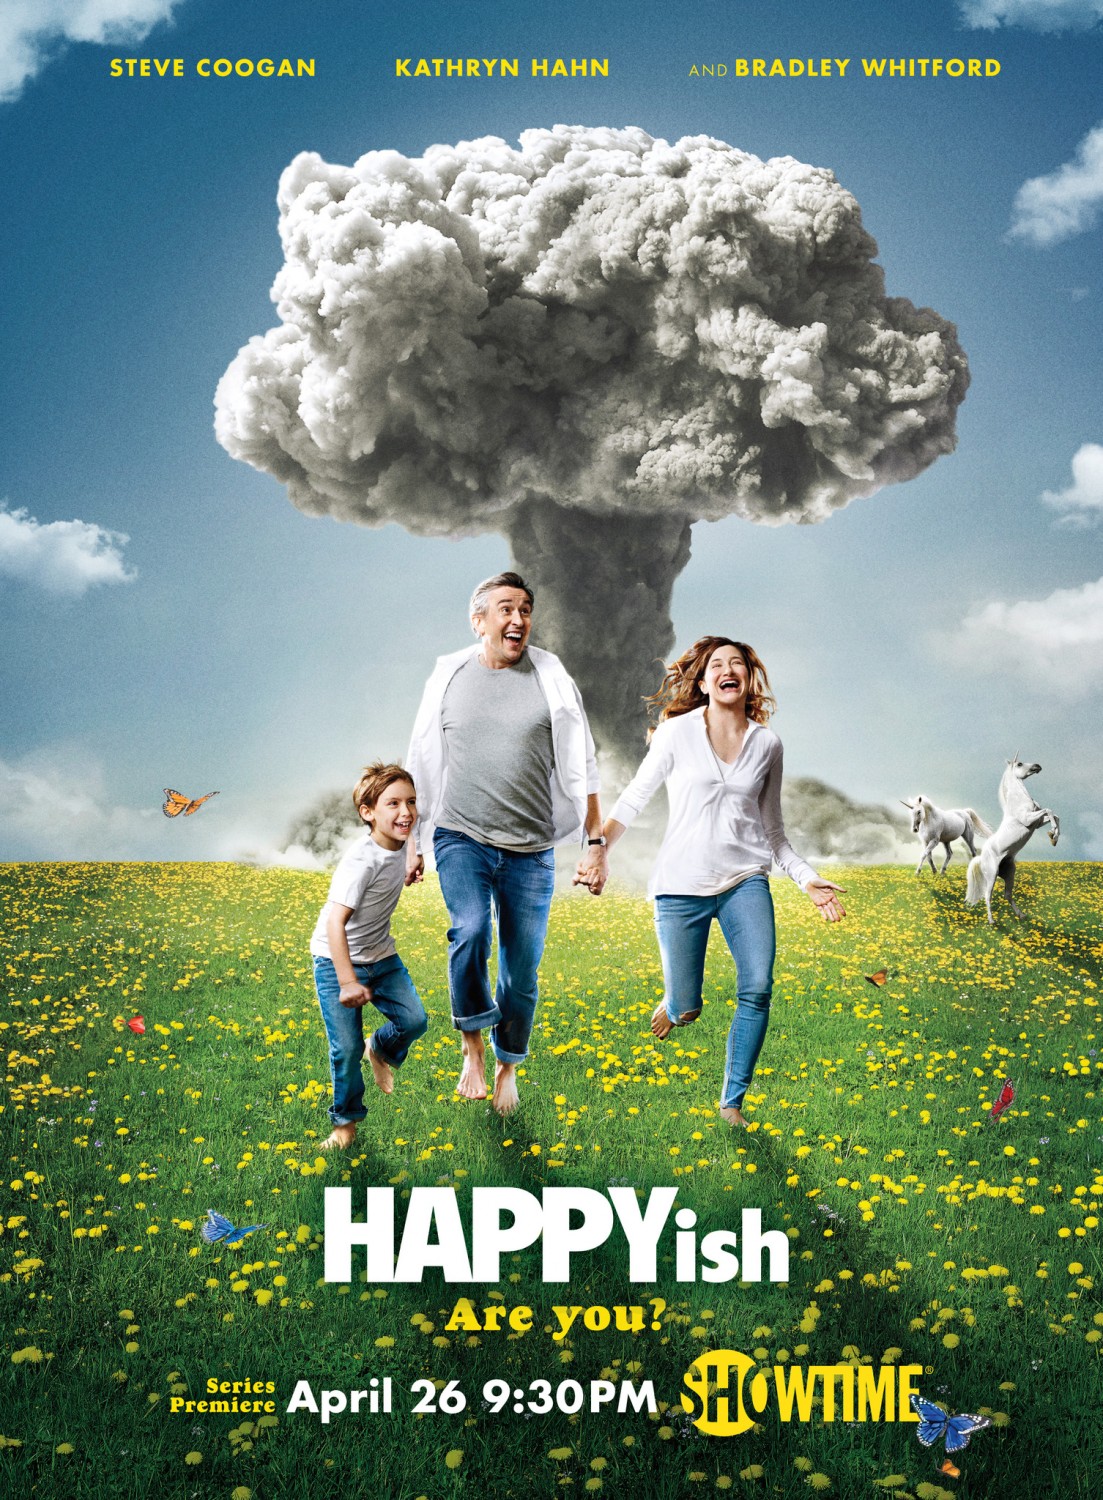 Extra Large TV Poster Image for Happyish 